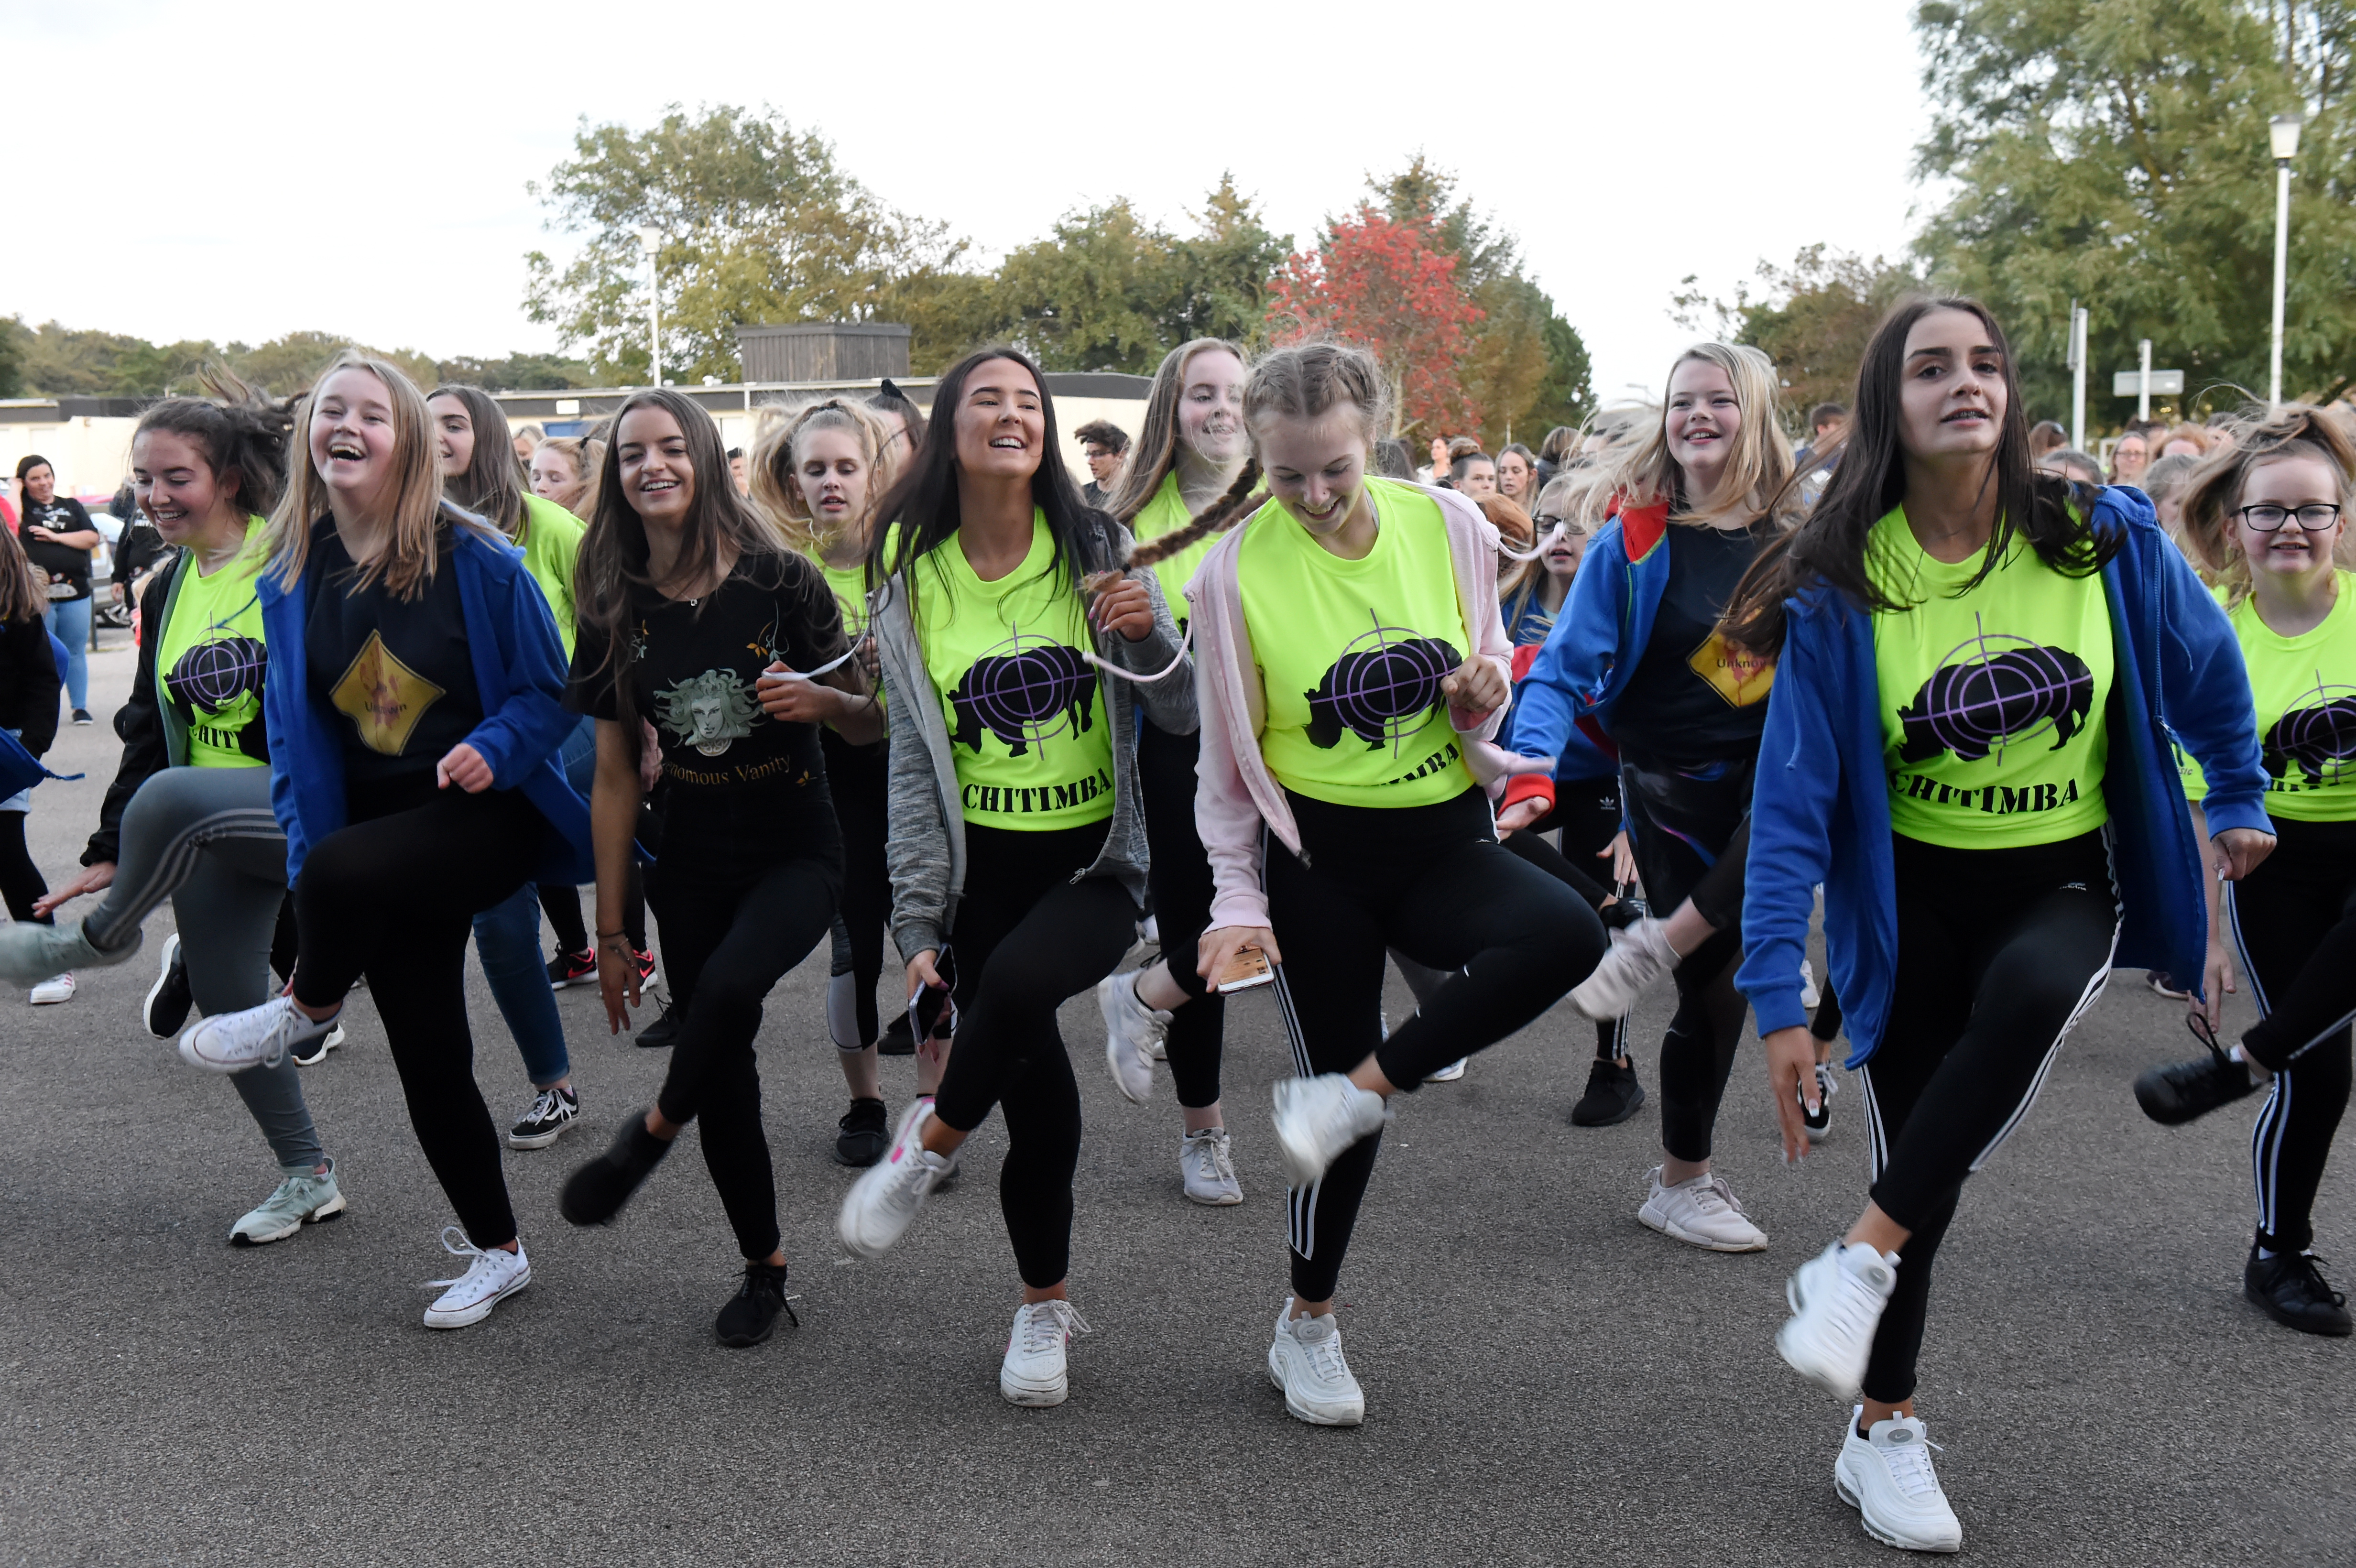 The Make It Happen group, is hoping to get momentum going to arrange an alternative event for Aberdeenshire pupils missing out on the Rock Challenge event that was supposed to take place next year.